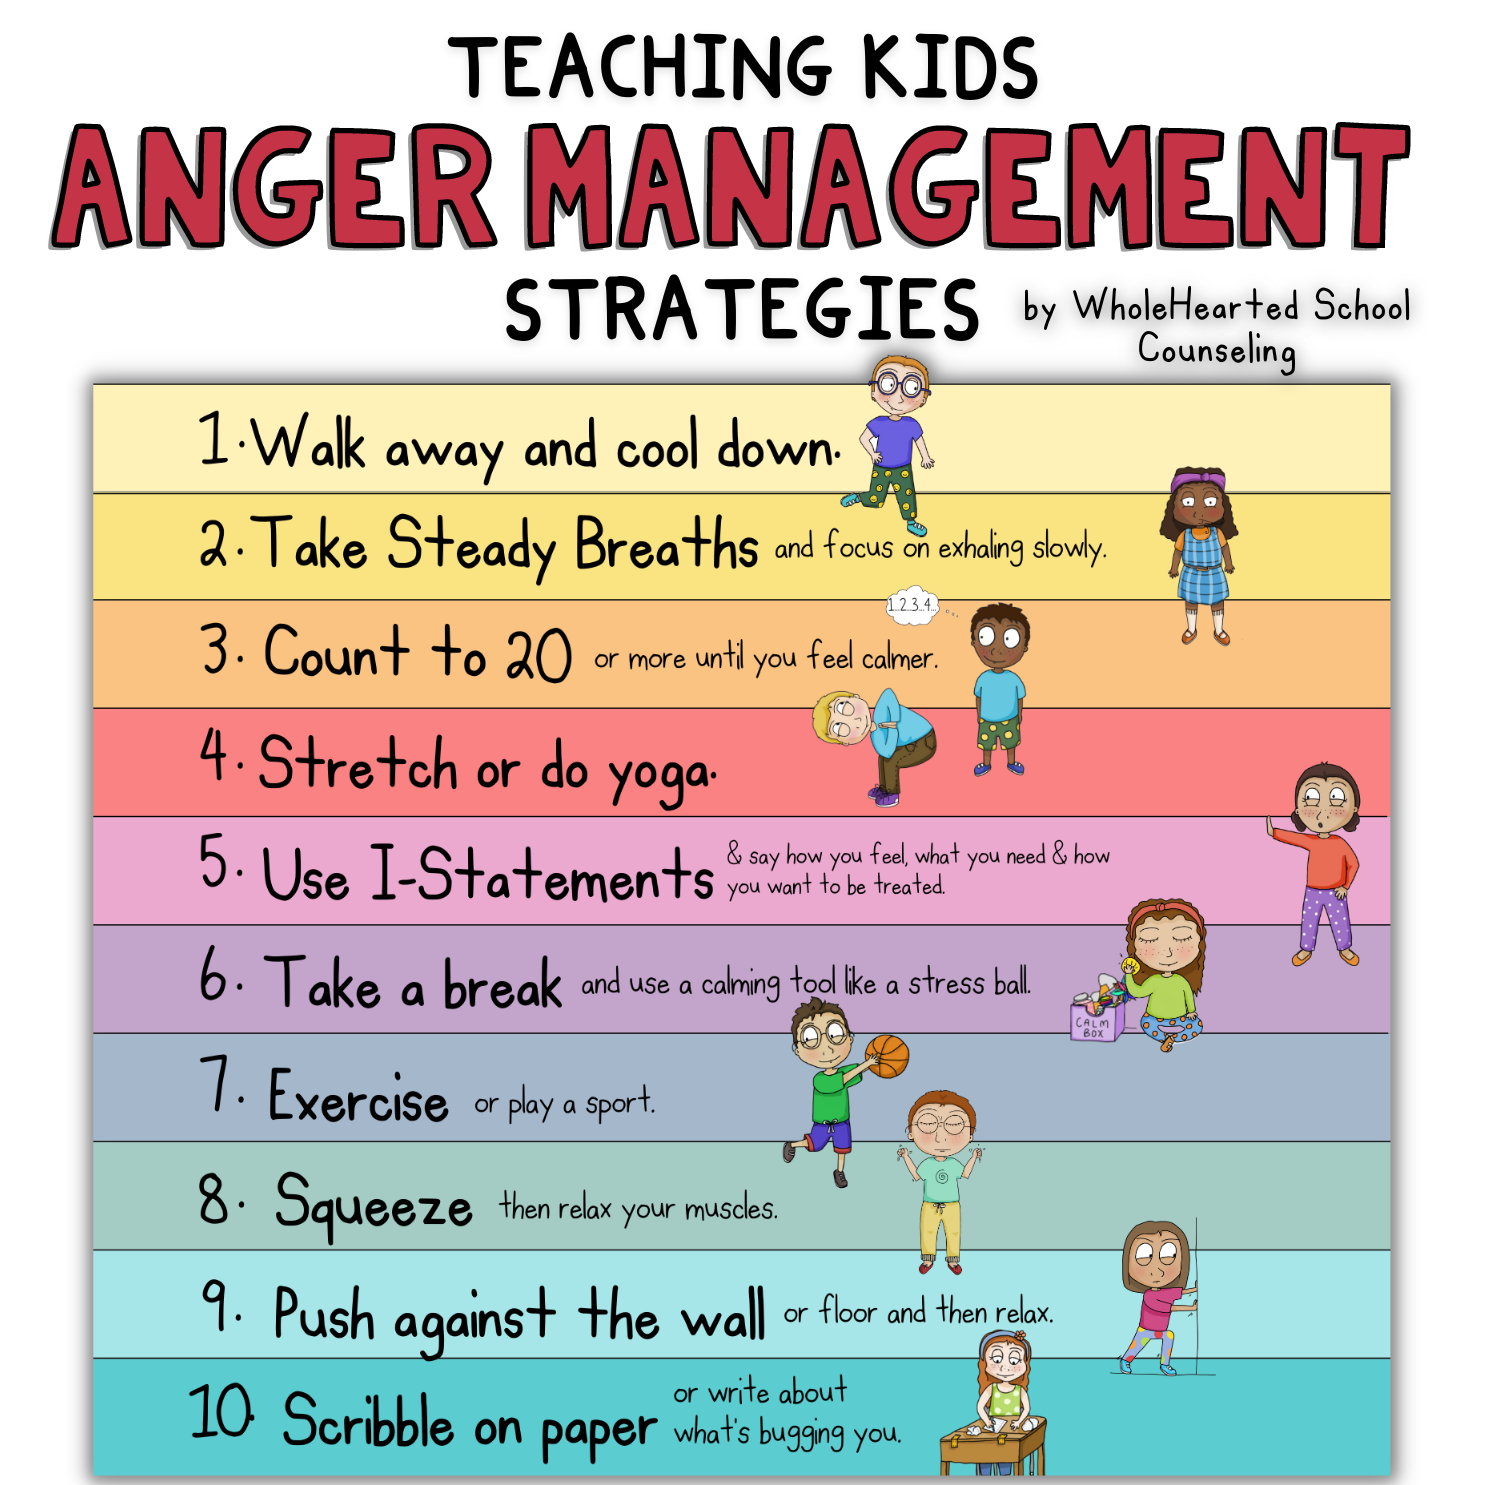 Teaching Anger Management Strategies for Kids by WholeHearted School Counseling